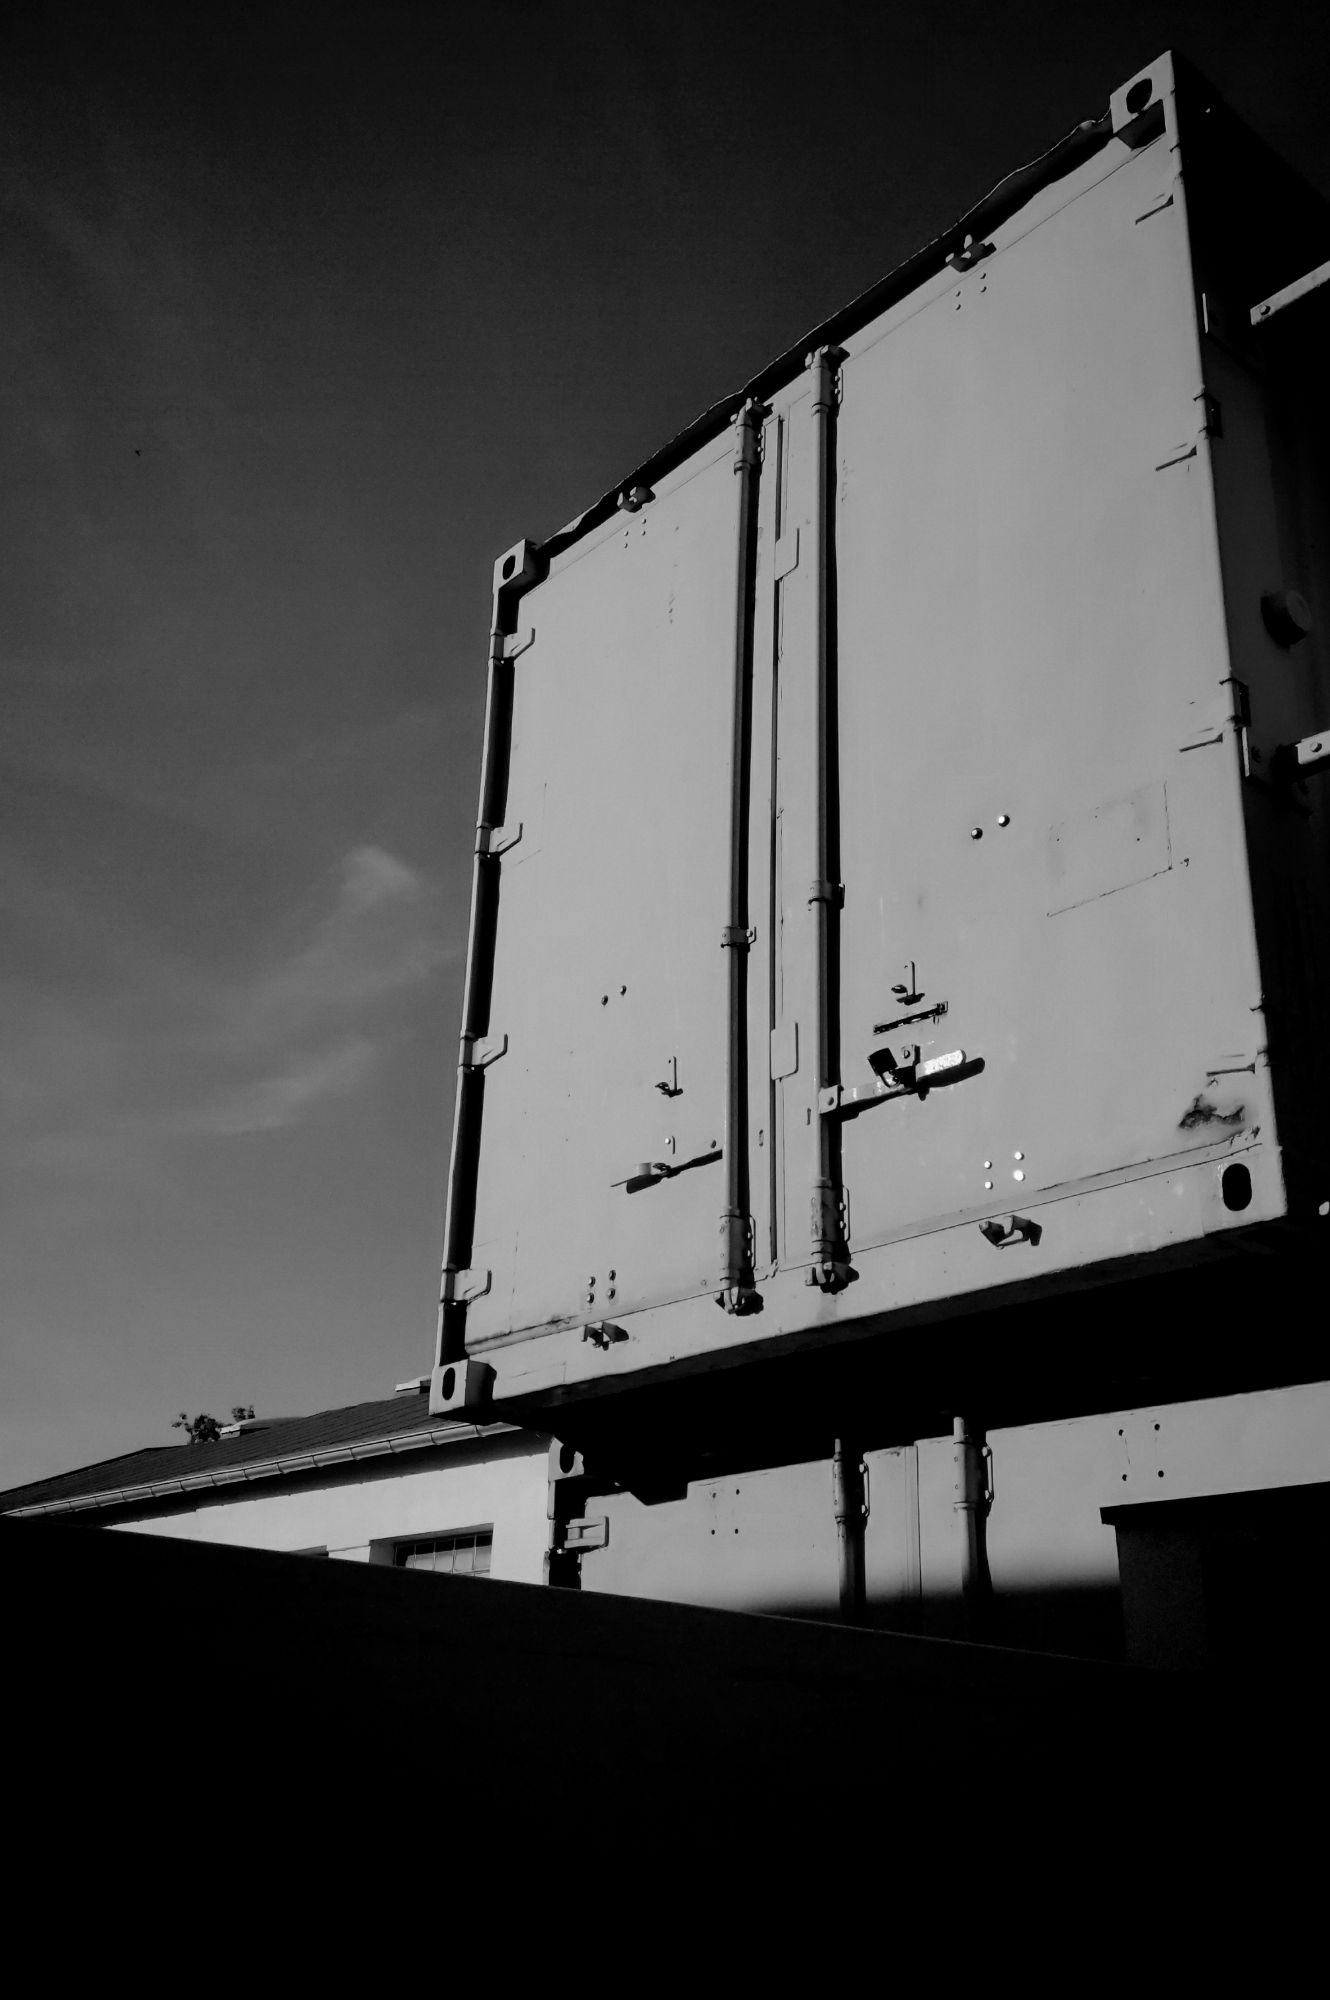 A container up on a wall, sky behind. Monochrome.